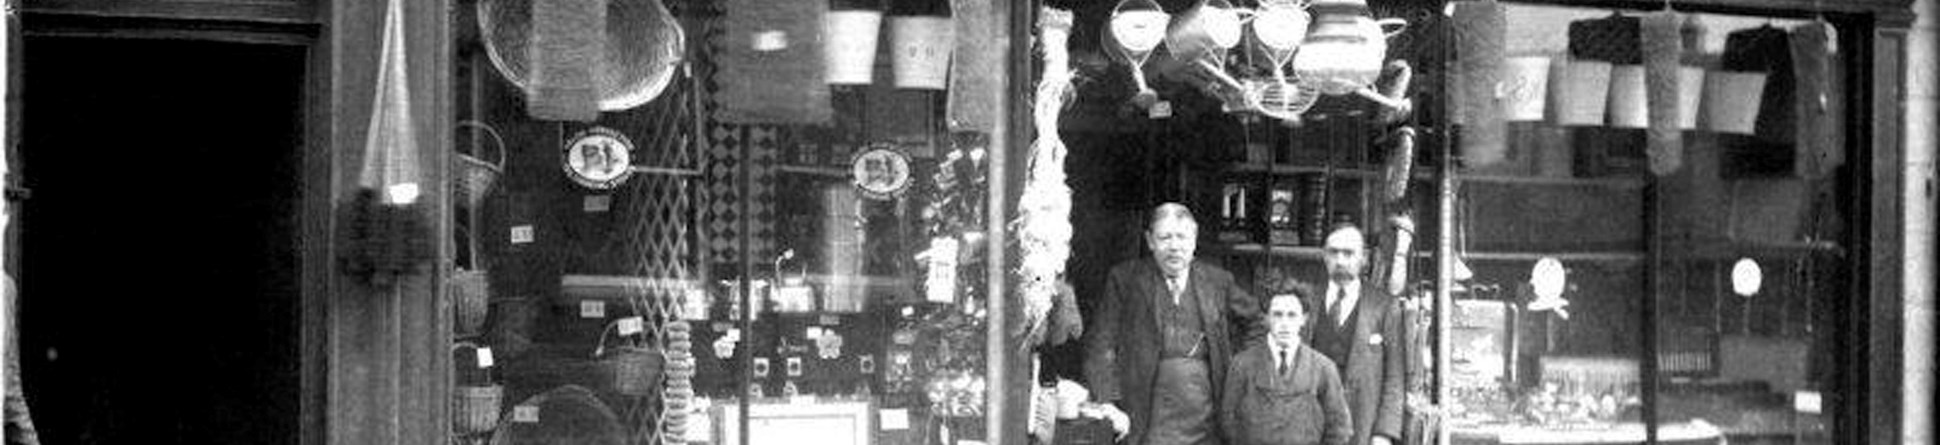 A black and white photograph shows three men wearing shirt, tie, and apron, standing in the doorway of an ironmonger's shop. The large windows either side of the doorway are filled with wares and a tin bath, watering cans and other objects hang above the door.